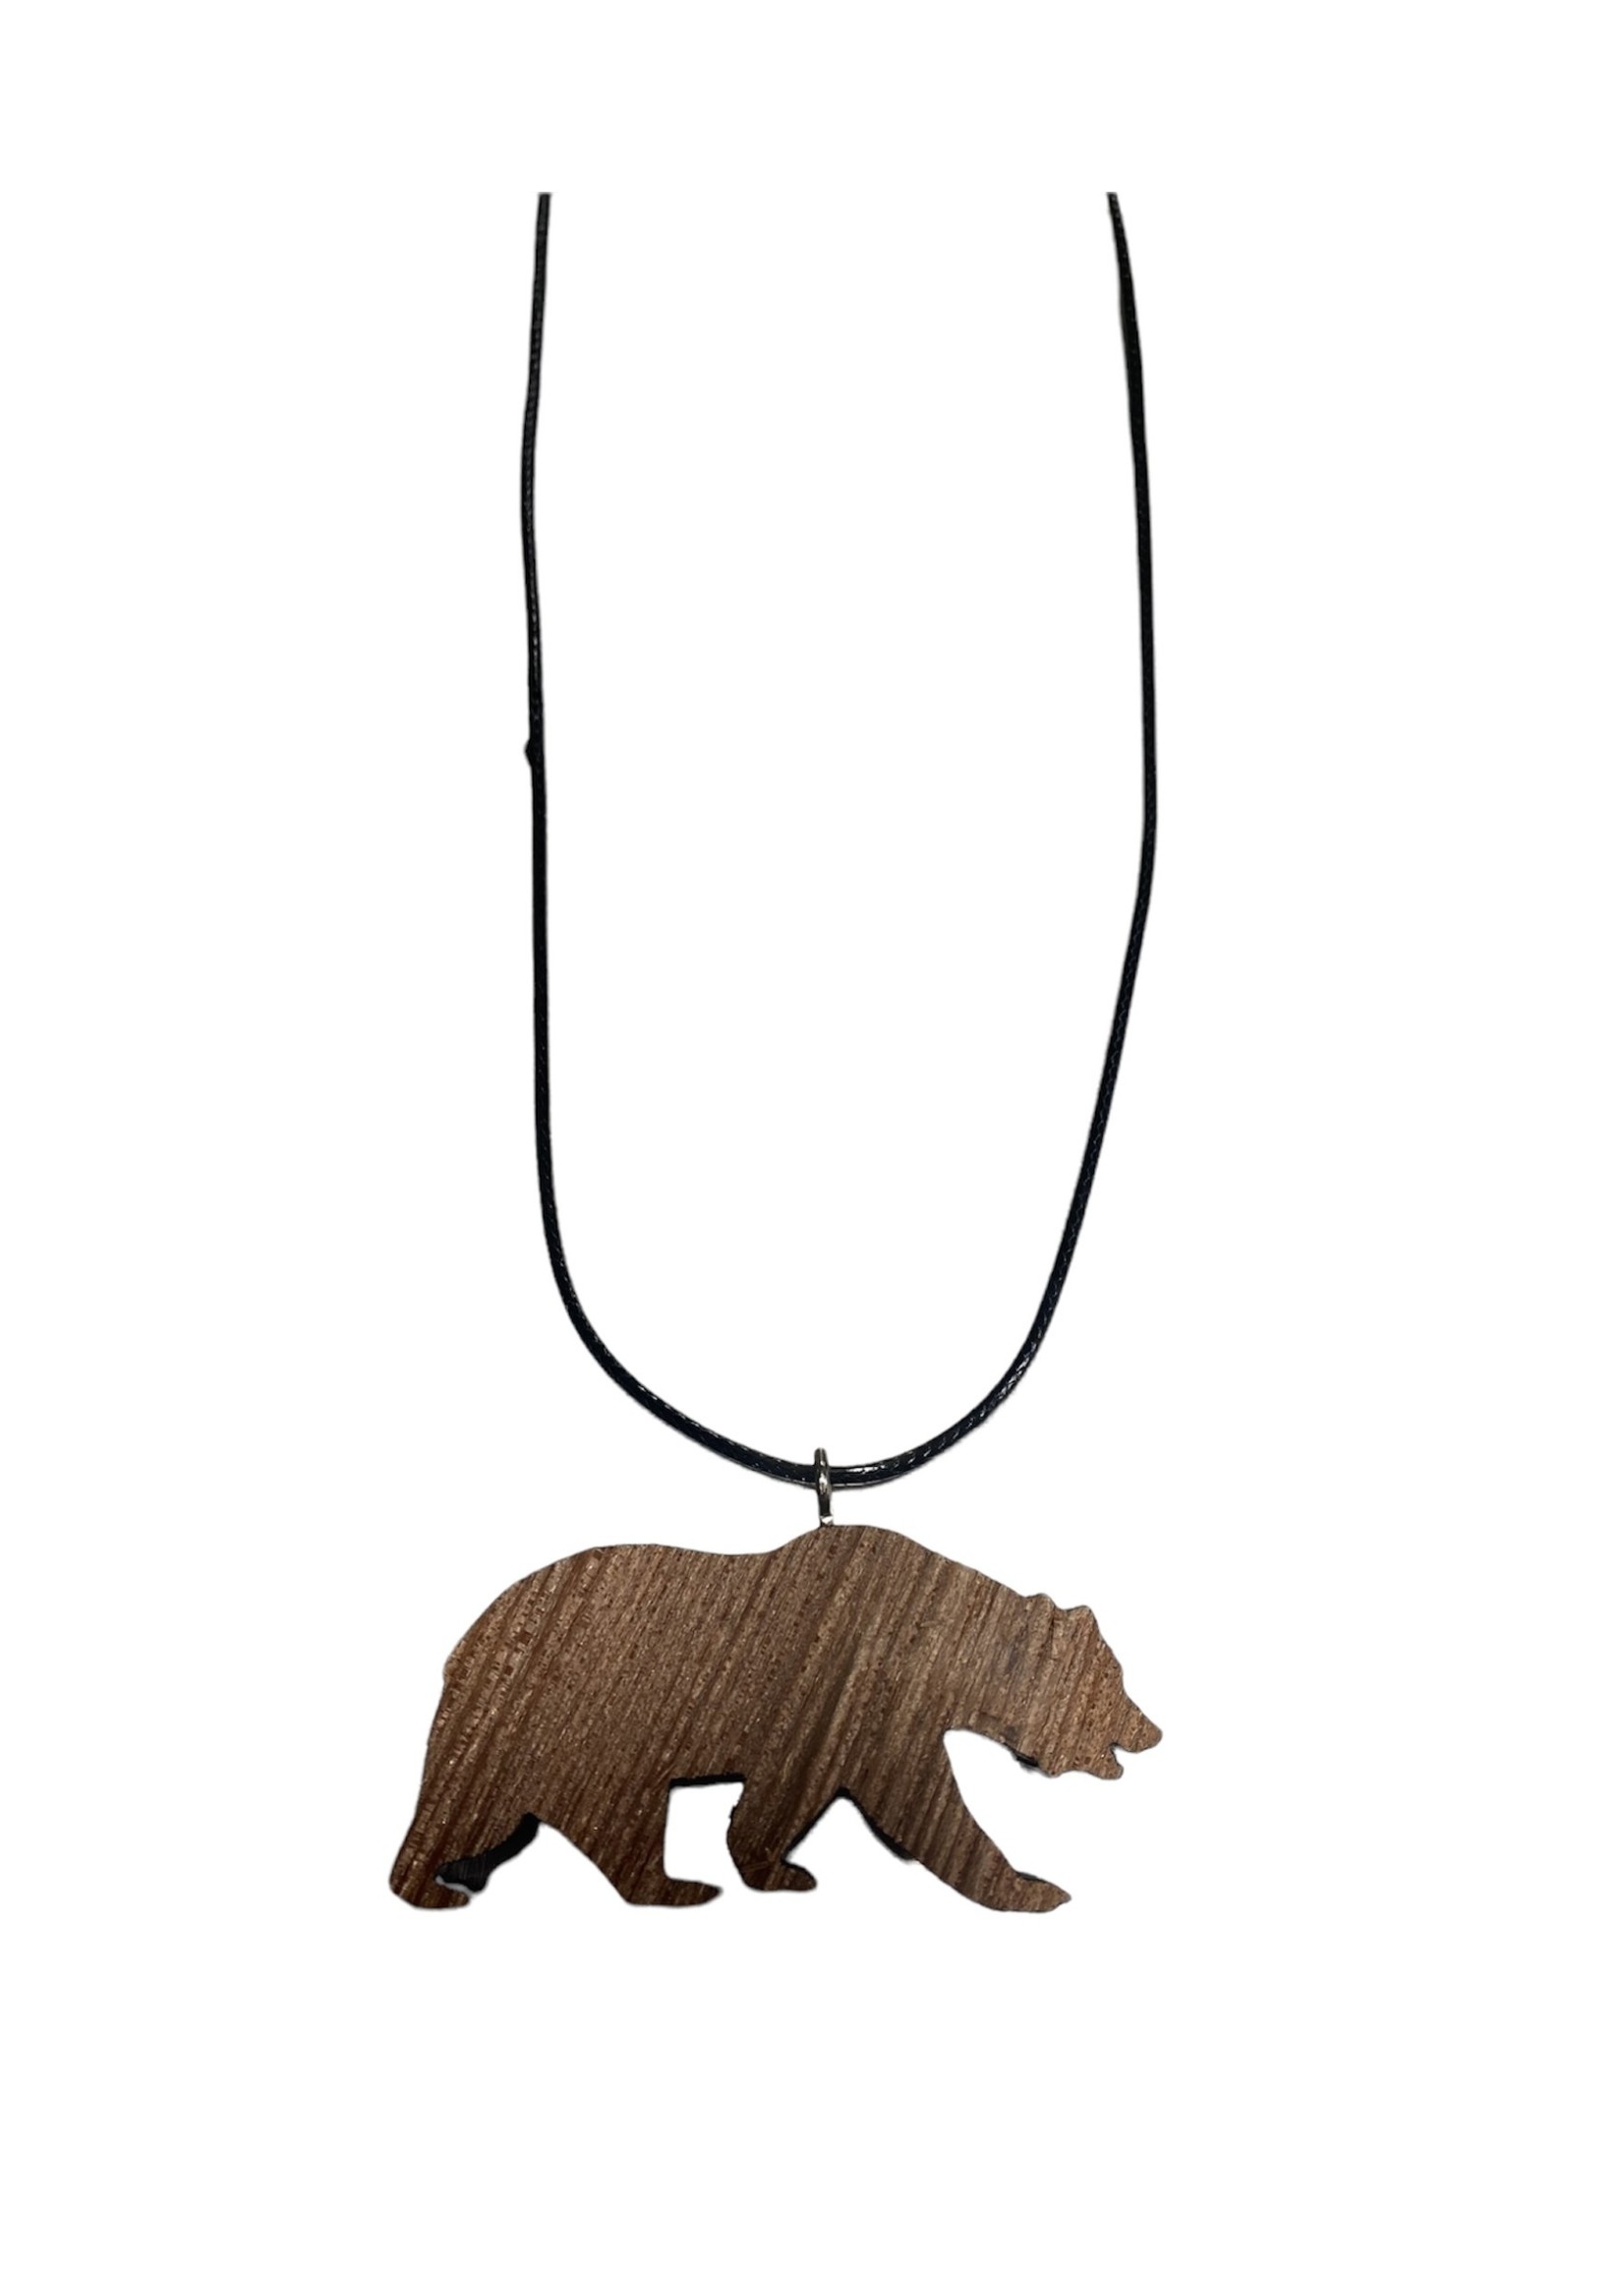 Old-Growth Necklace - Bear